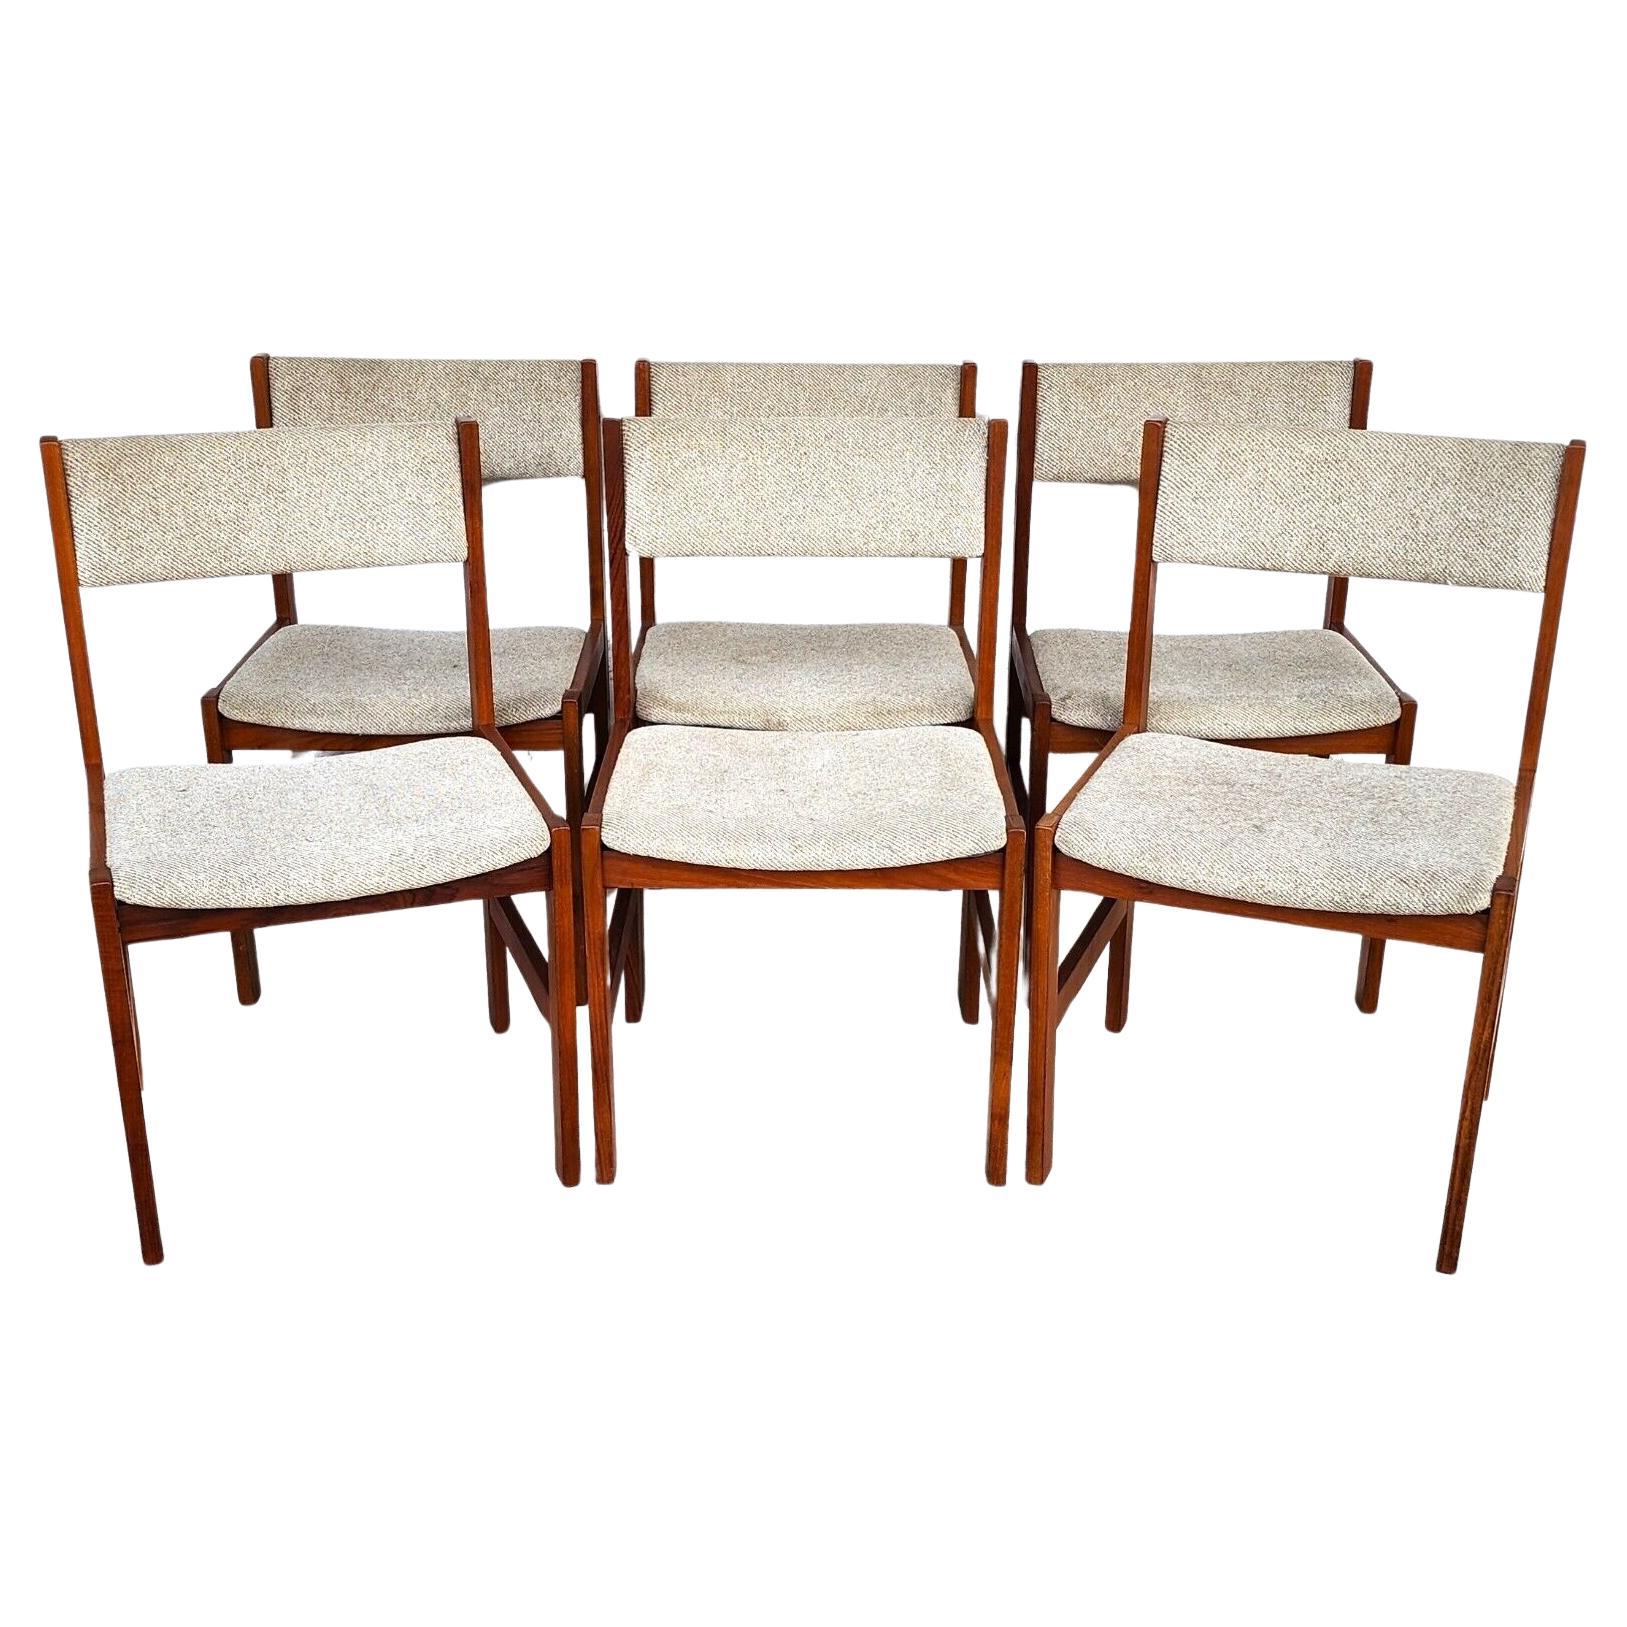 MCM Teak Dining Chairs Scandinavian Modern by Sun Furniture Set of 6 For Sale